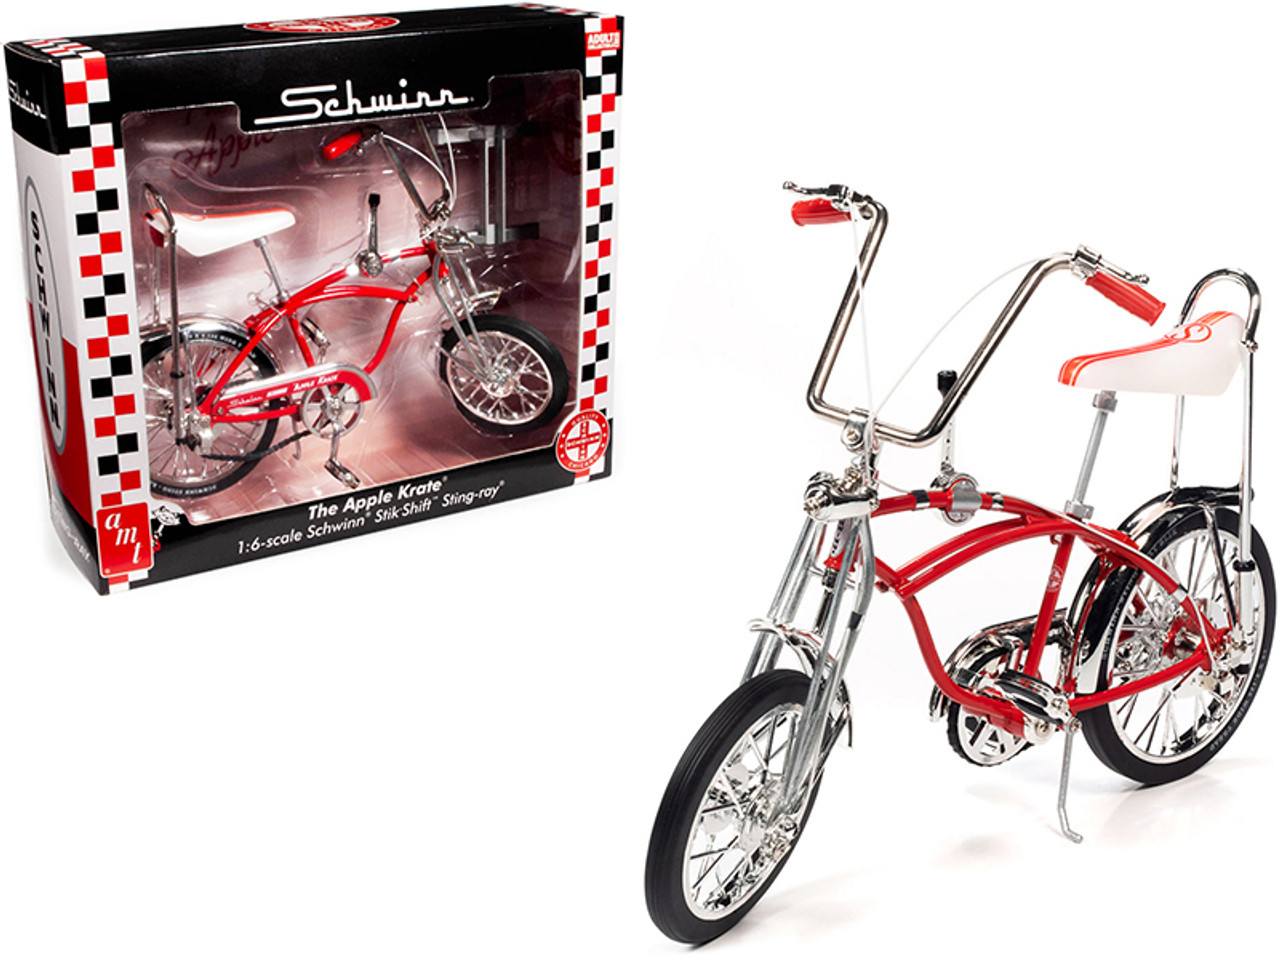 Schwinn Stik-Shift Sting-Ray Bicycle "Apple Krate" Red 1/6 Diecast Model by AMT